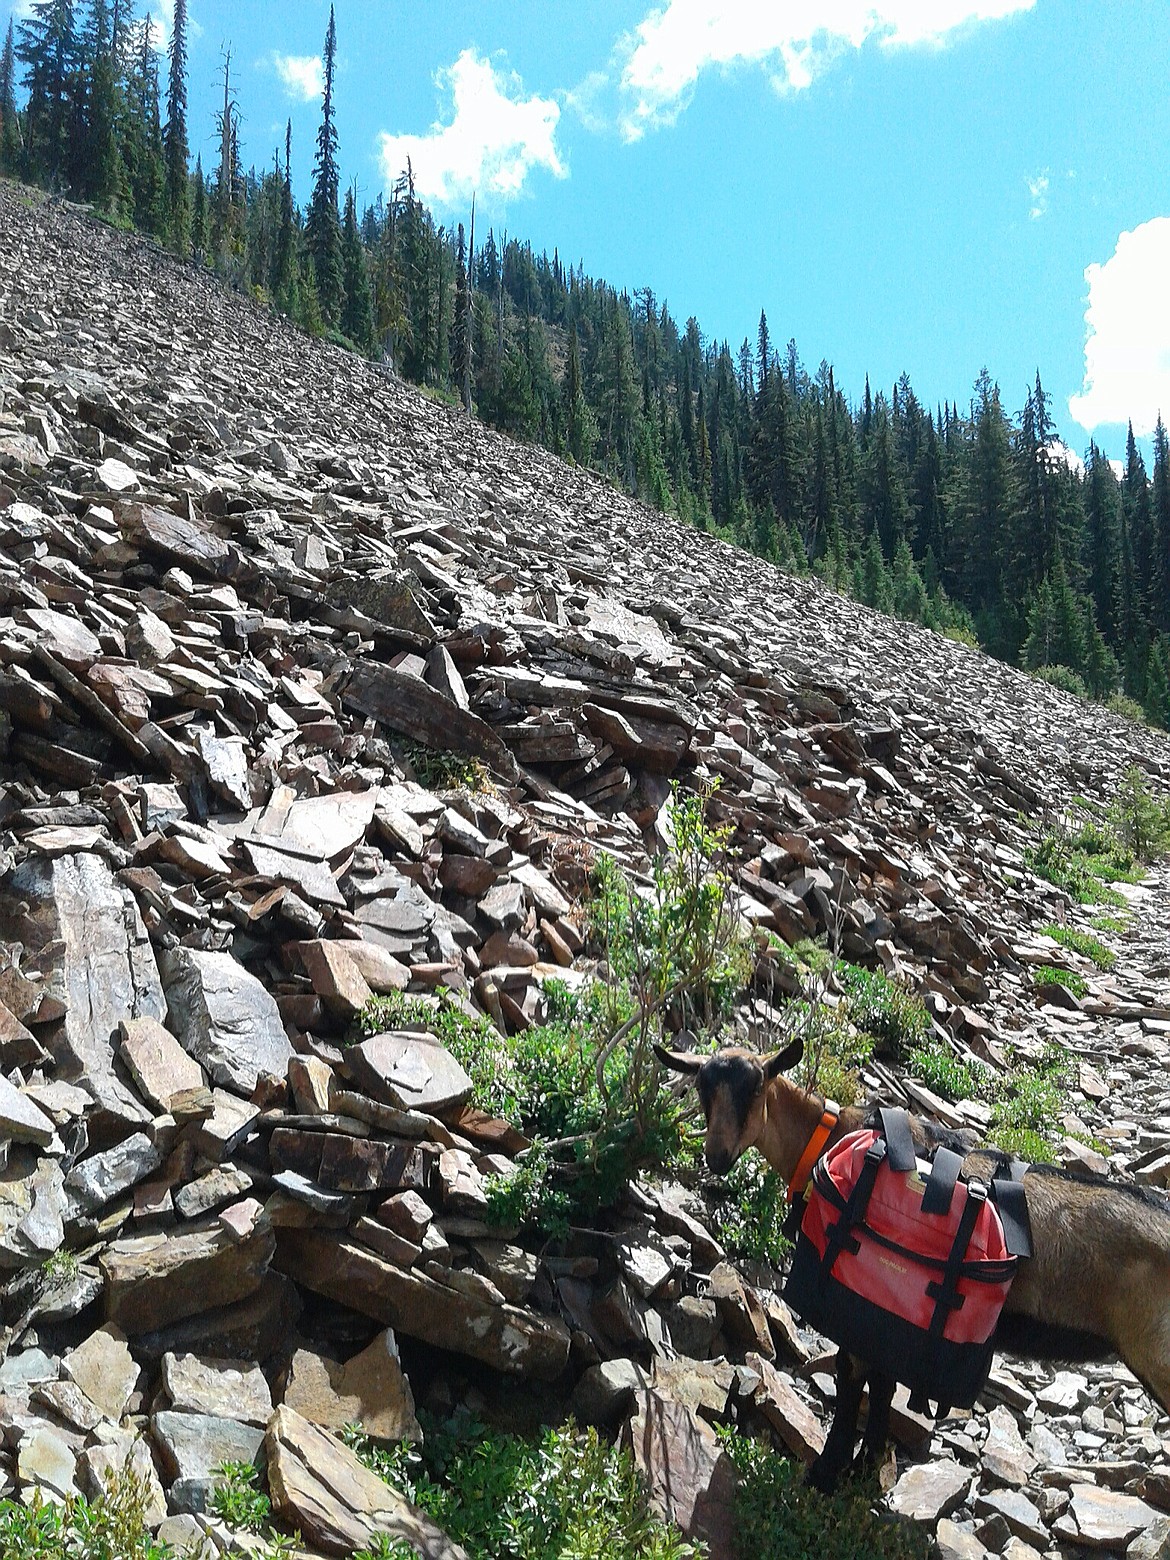 The steep talus slopes that Tank enjoys during the summer often become avalanche prone areas during the winter.